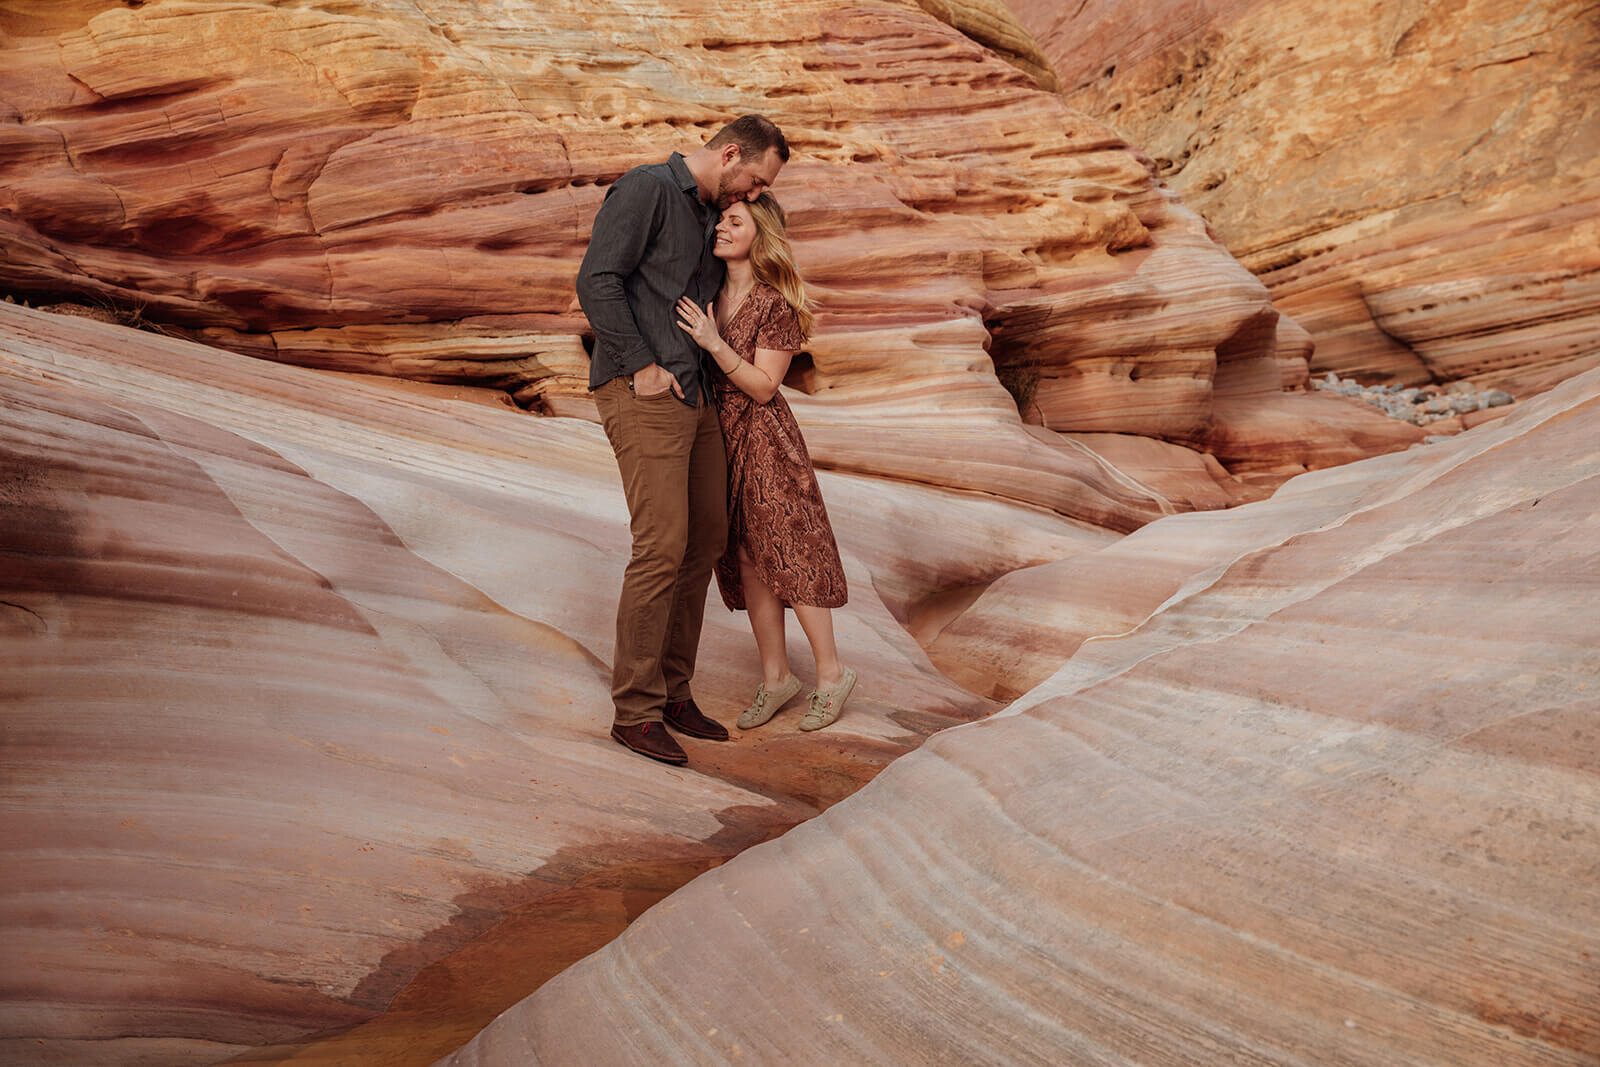  Couple explores a canyon in Valley of Fire State Park next to Lake Mead, outside of Las Vegas, Nevada. Desert southwest elopement photographer 